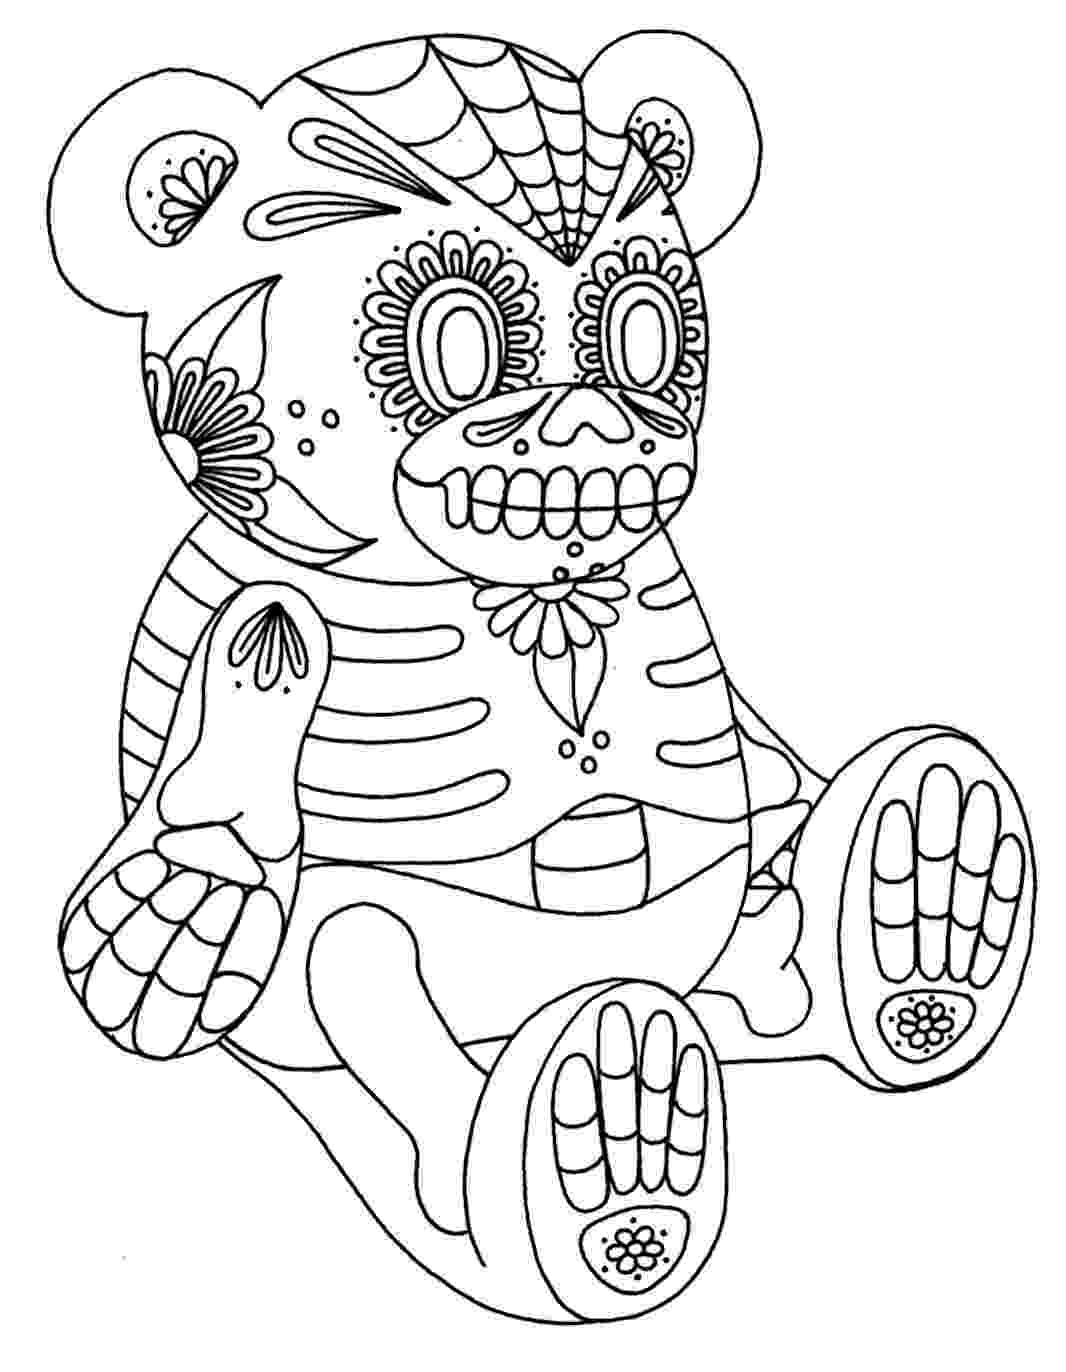 skull coloring pages printable yucca flats nm october 2012 skull coloring pages printable 